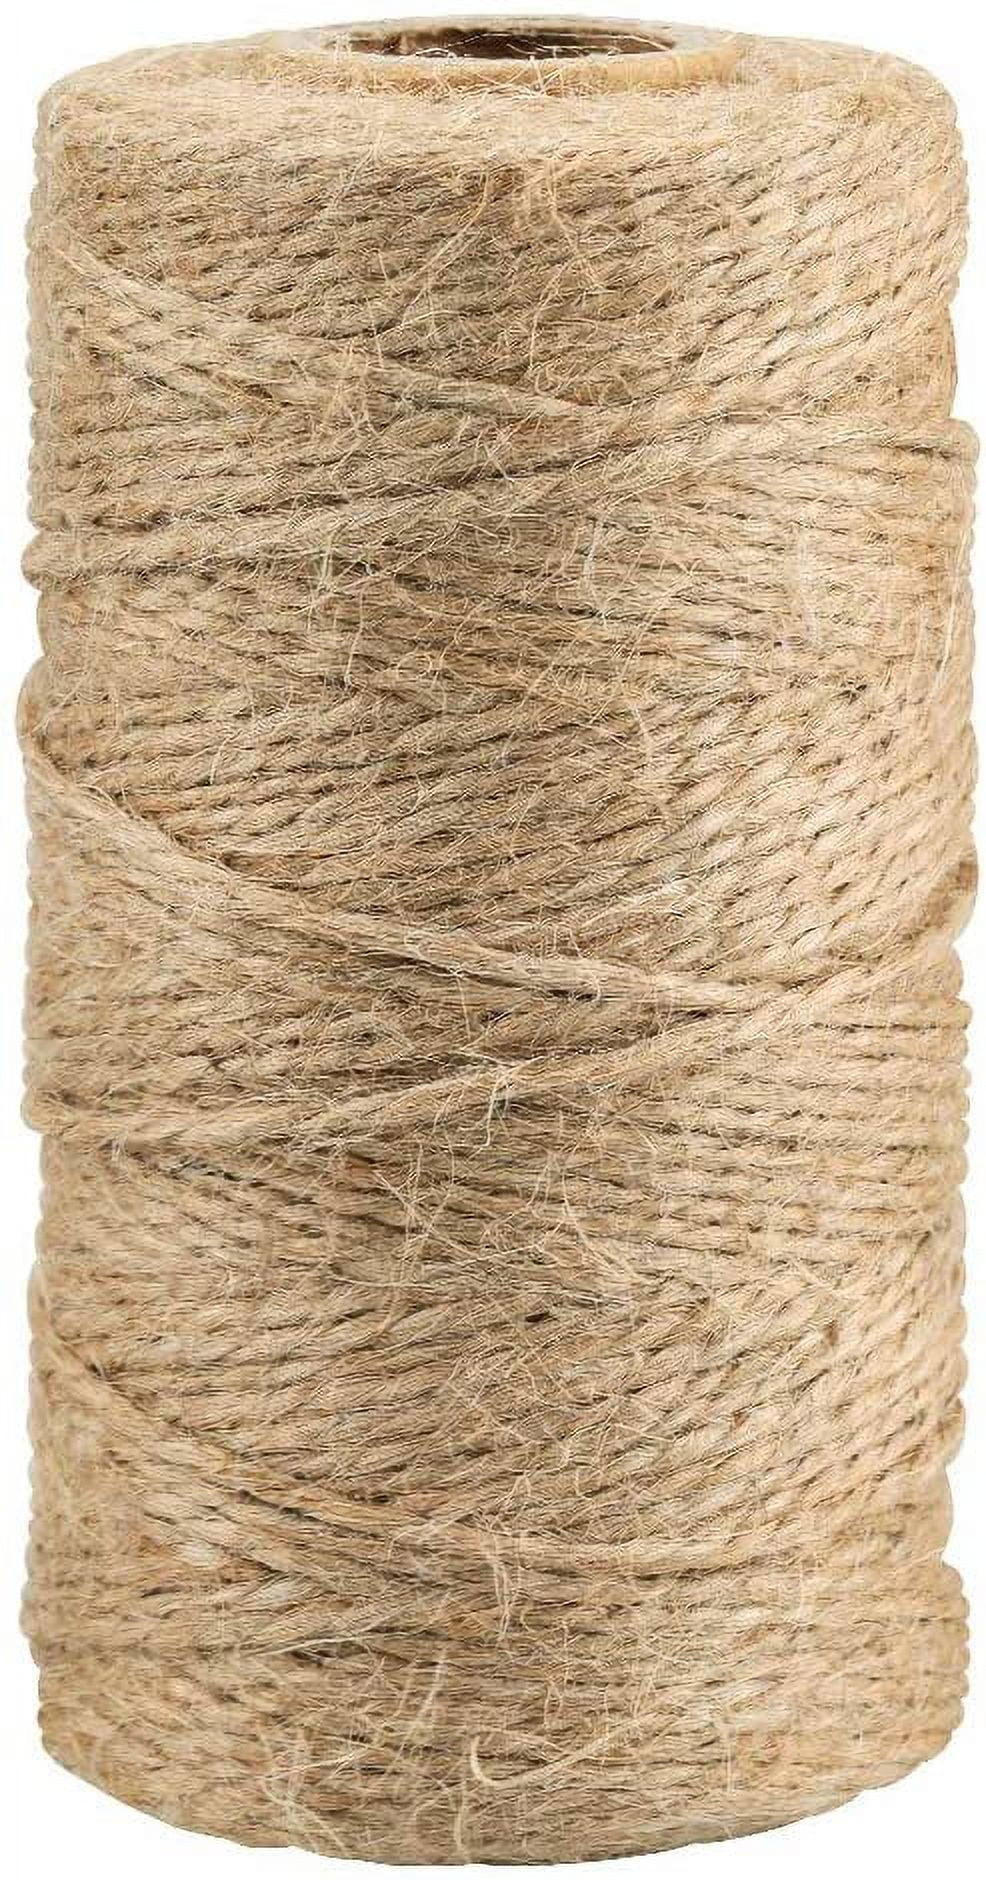 3 Strands 2mm/3mm Macrame Cord Cotton Twisted Rope String for DIY Crafts